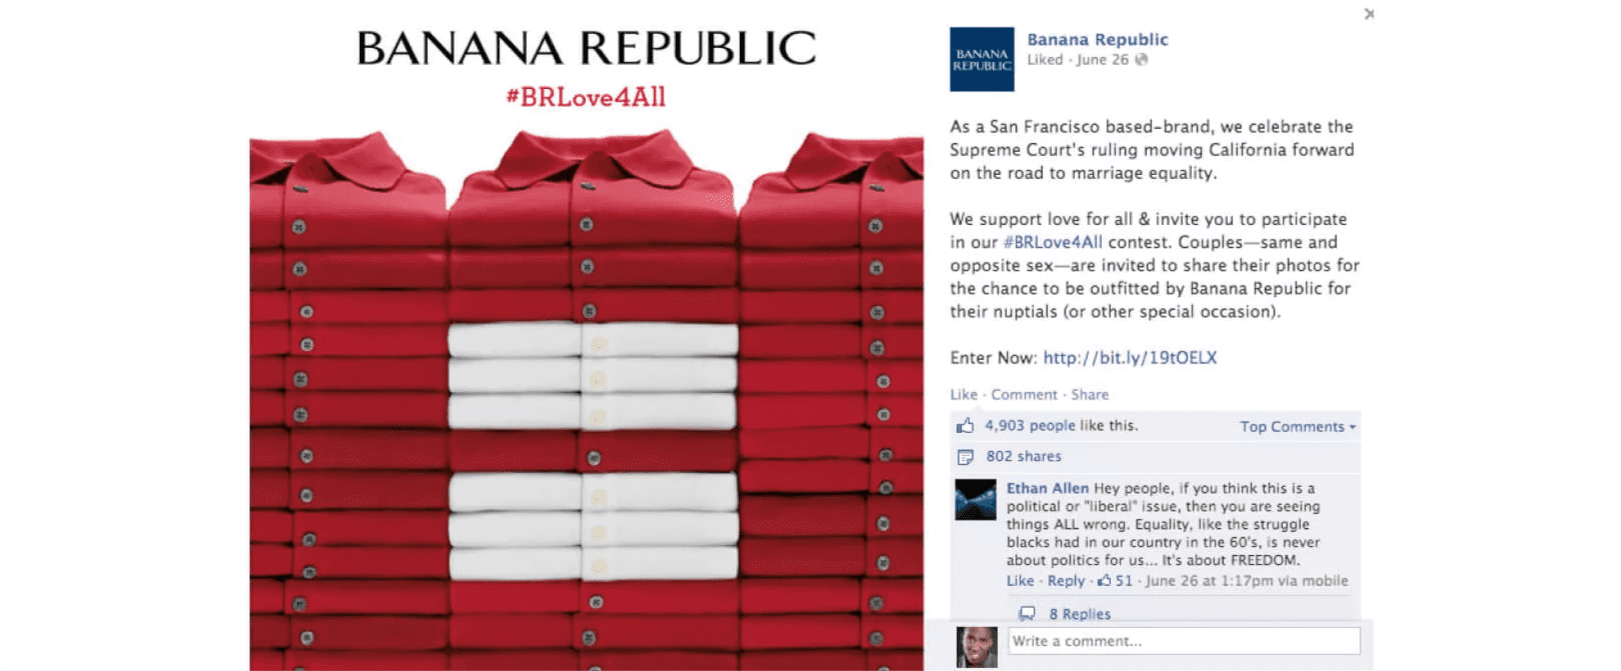 Banana Republic's Facebook post with #BRLove4All campaign, showcasing a stack of red and white shirts symbolizing the brand's support for marriage equality.